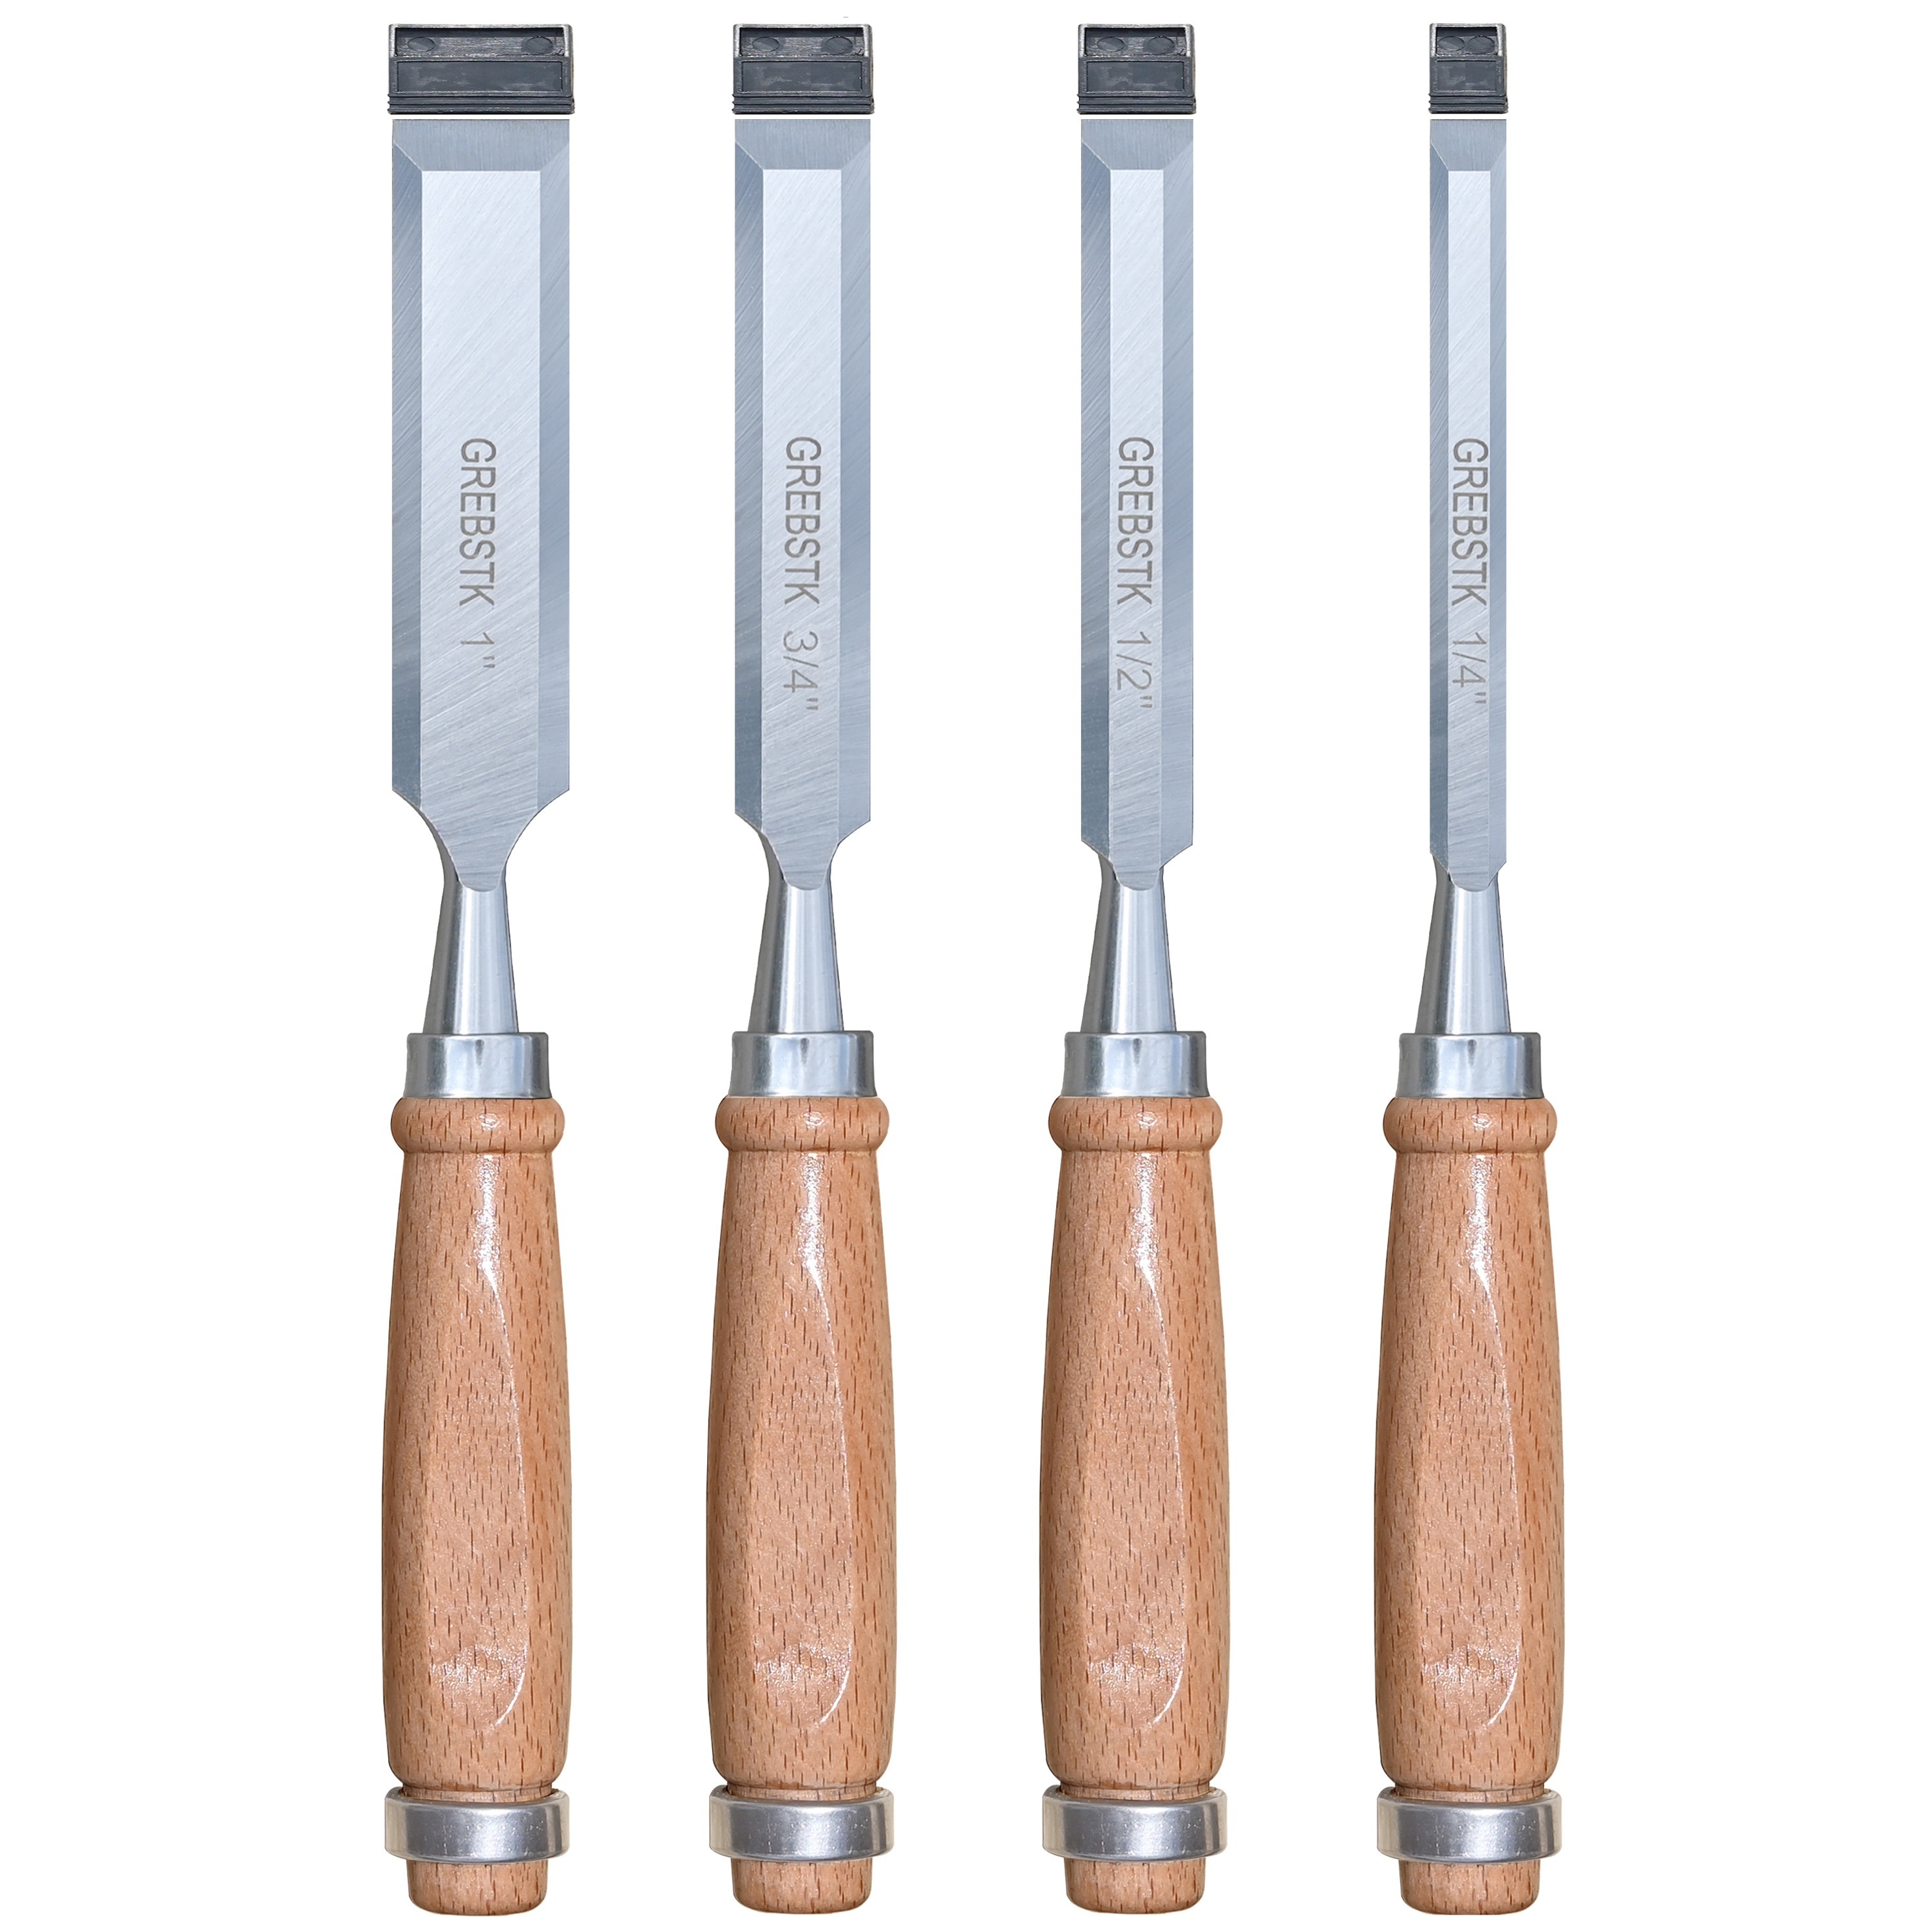 GREBSTK 4-piece Wood Chisel Set: Durable CR-V Steel Chisels With Beech  Handles, Ideal for Woodworking. Includes Oxford Bag 